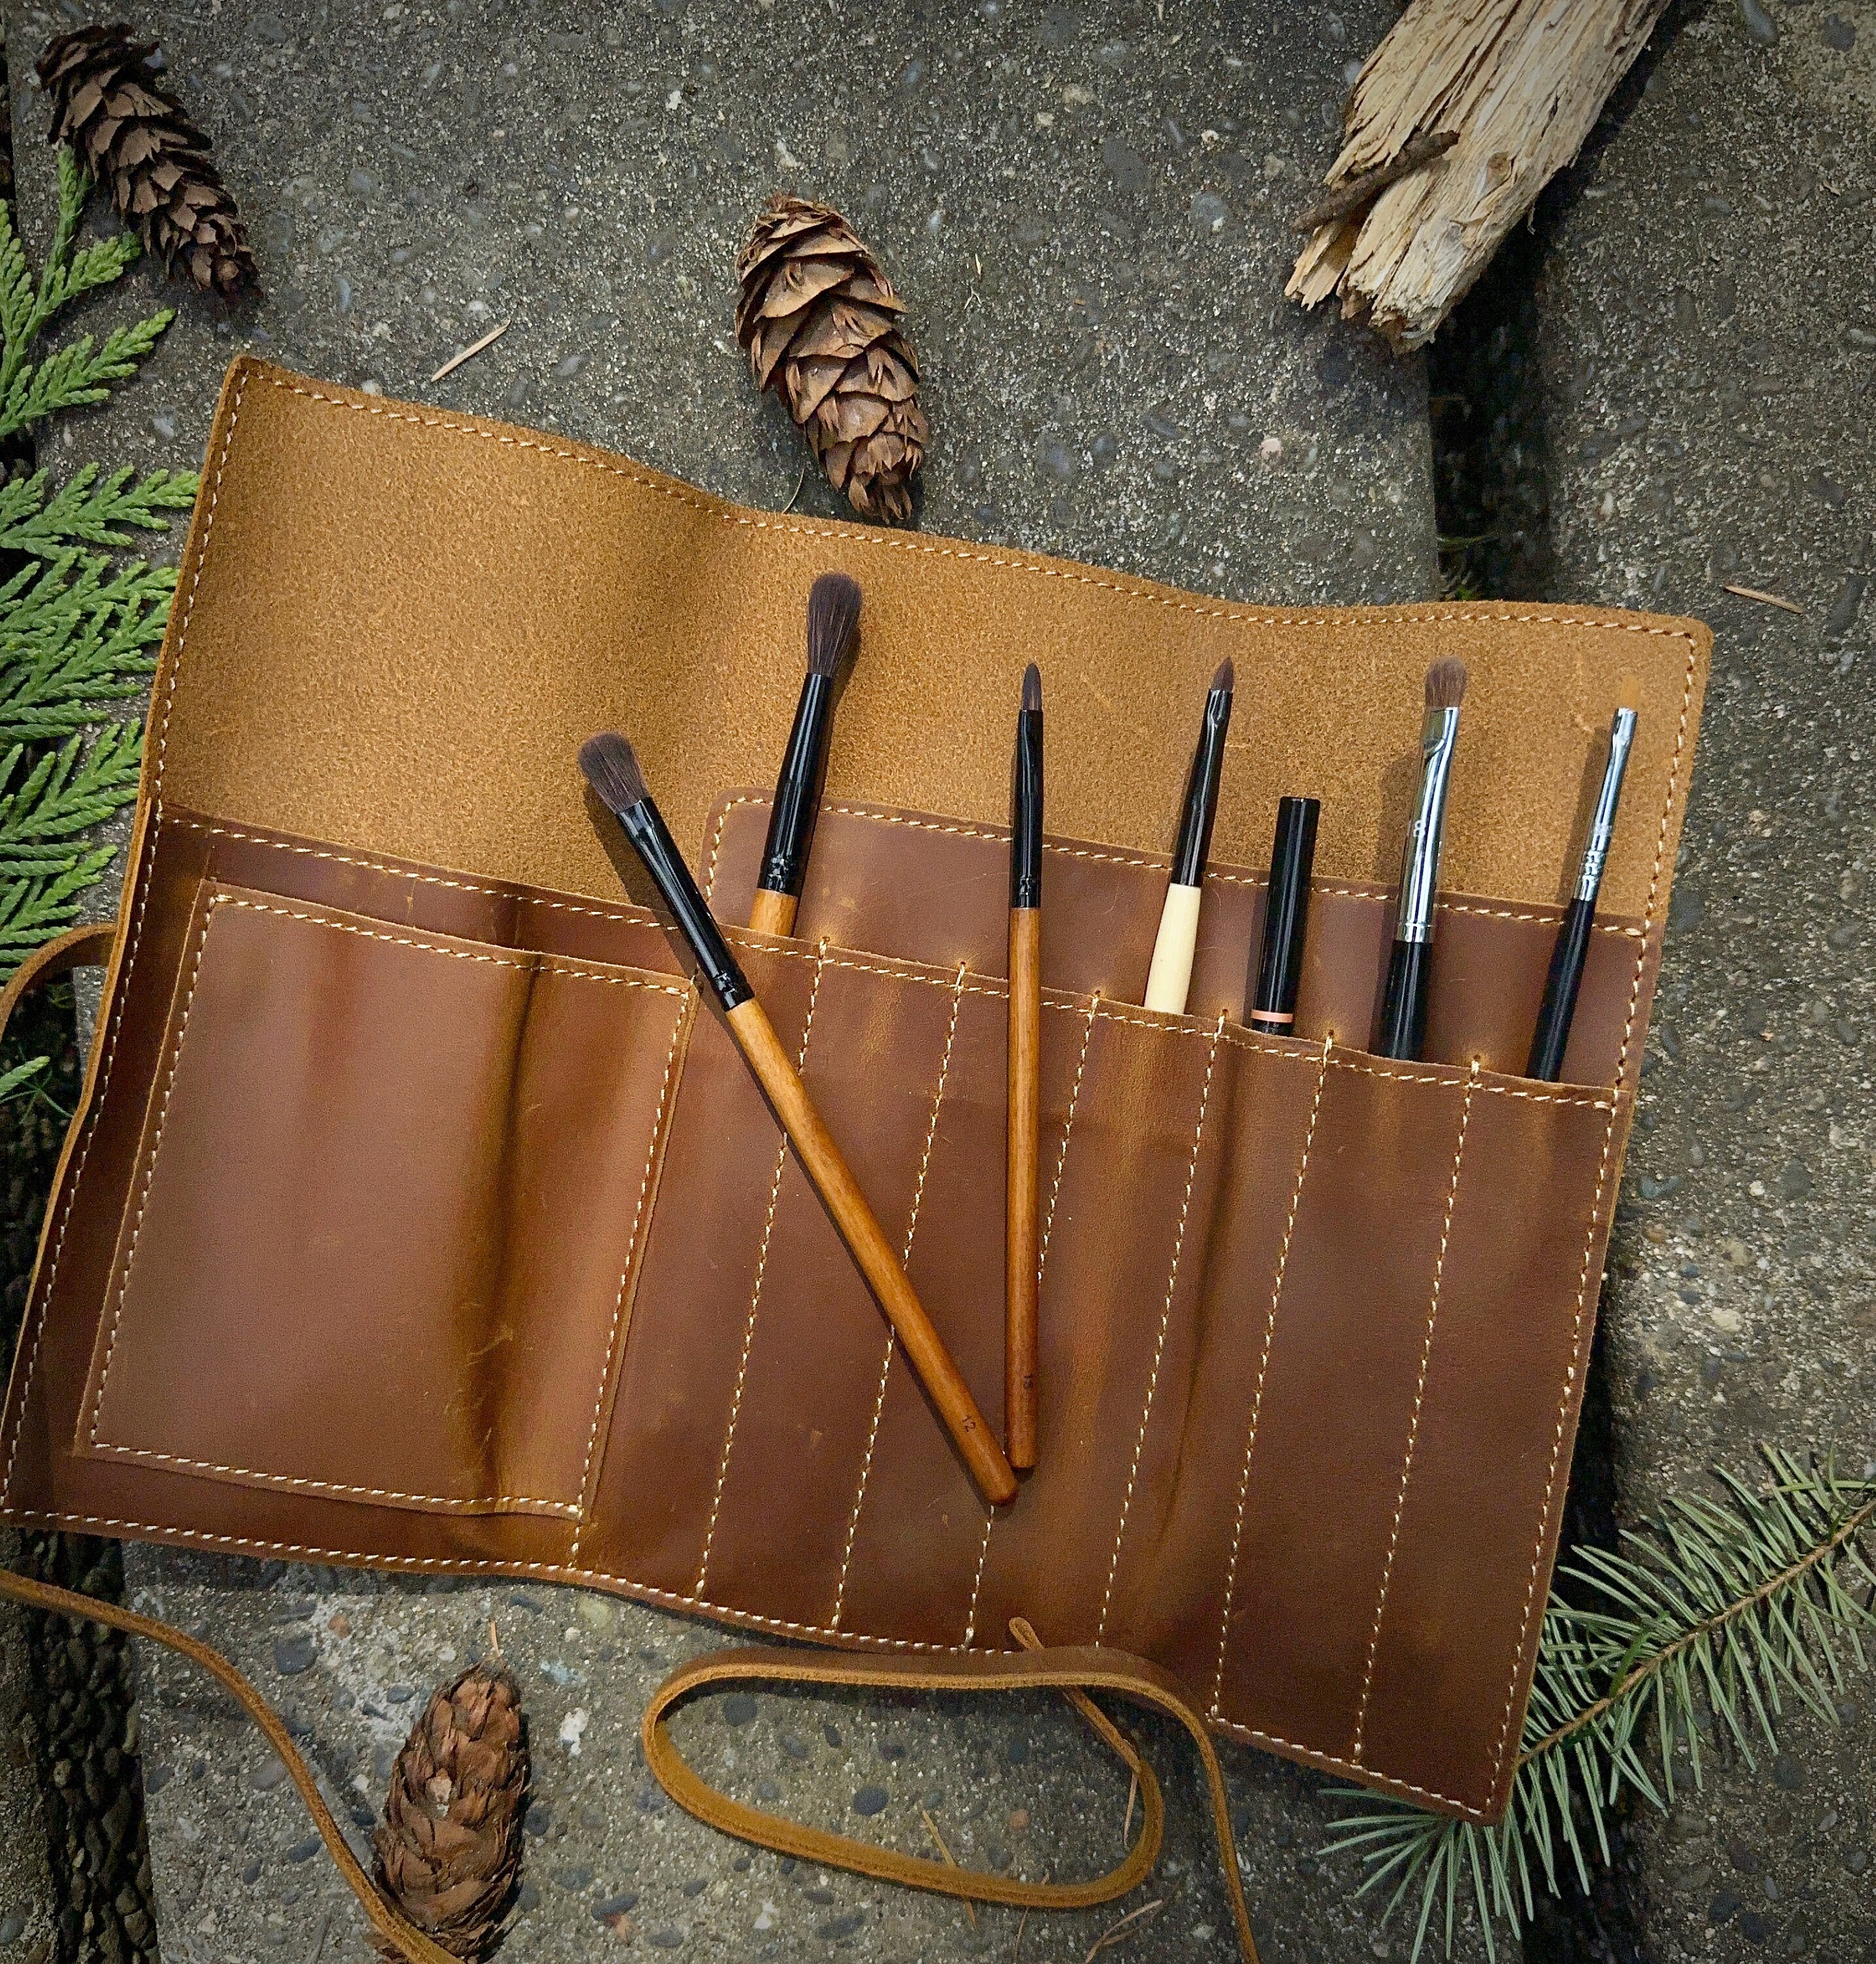 Leather pencil roll, Leather roll up pencil case, Leather pencil